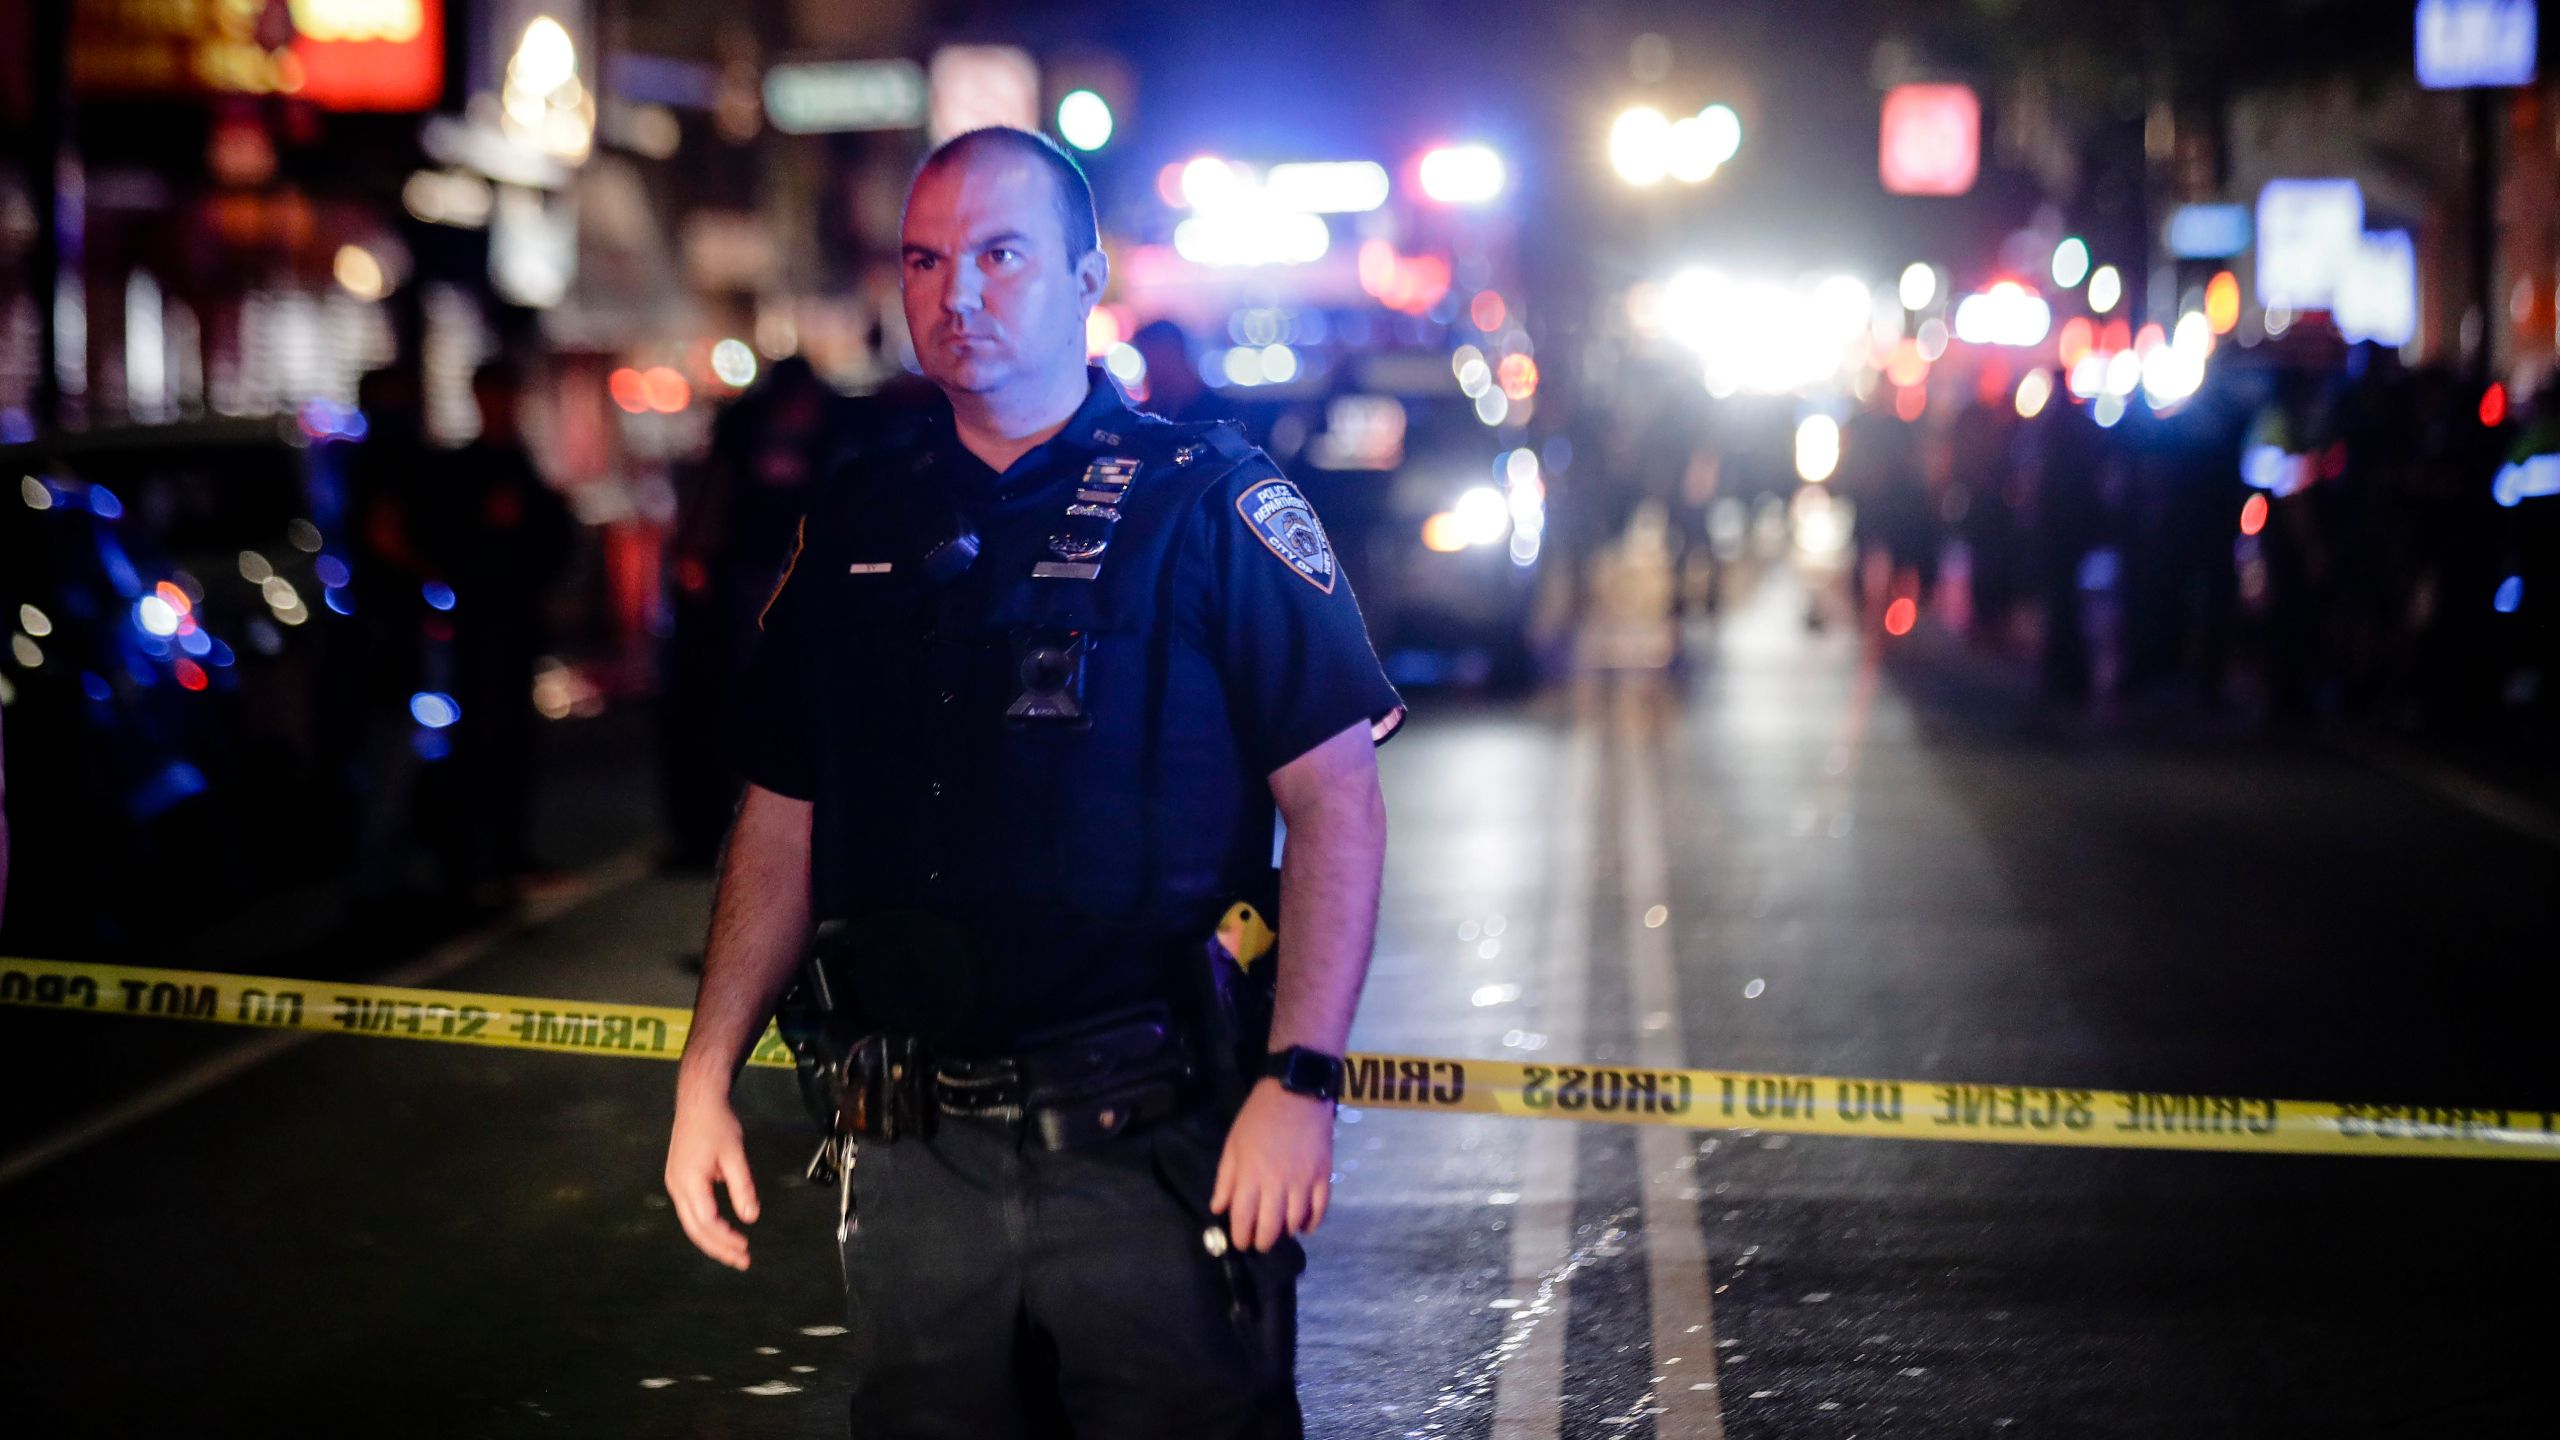 NYPD boss wants calm after stabbing, other attacks on cops